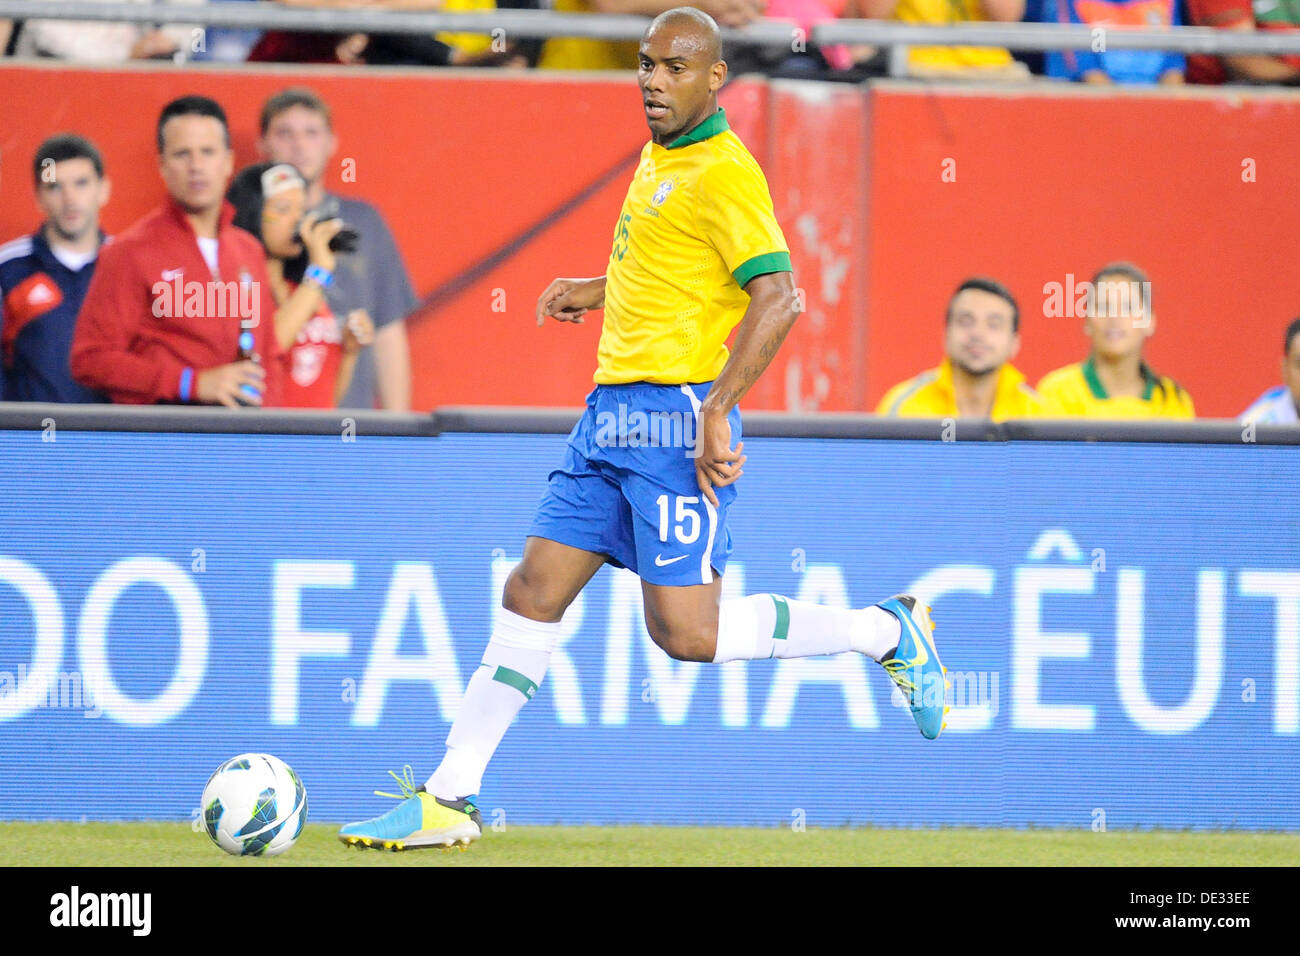 Foxborough, Massachusetts, USA. 10th Sep, 2013. September 10 , 2013 - Foxborough, Massachusetts, U.S. - Brazil's Maicon (15) plays the ball during the FIFA friendly match between Brazil and Portugal held at Gillette Stadium in Foxborough Massachusetts. Final score Brazil 3 Portugal 1 Eric Canha/CSM. Credit:  csm/Alamy Live News Stock Photo